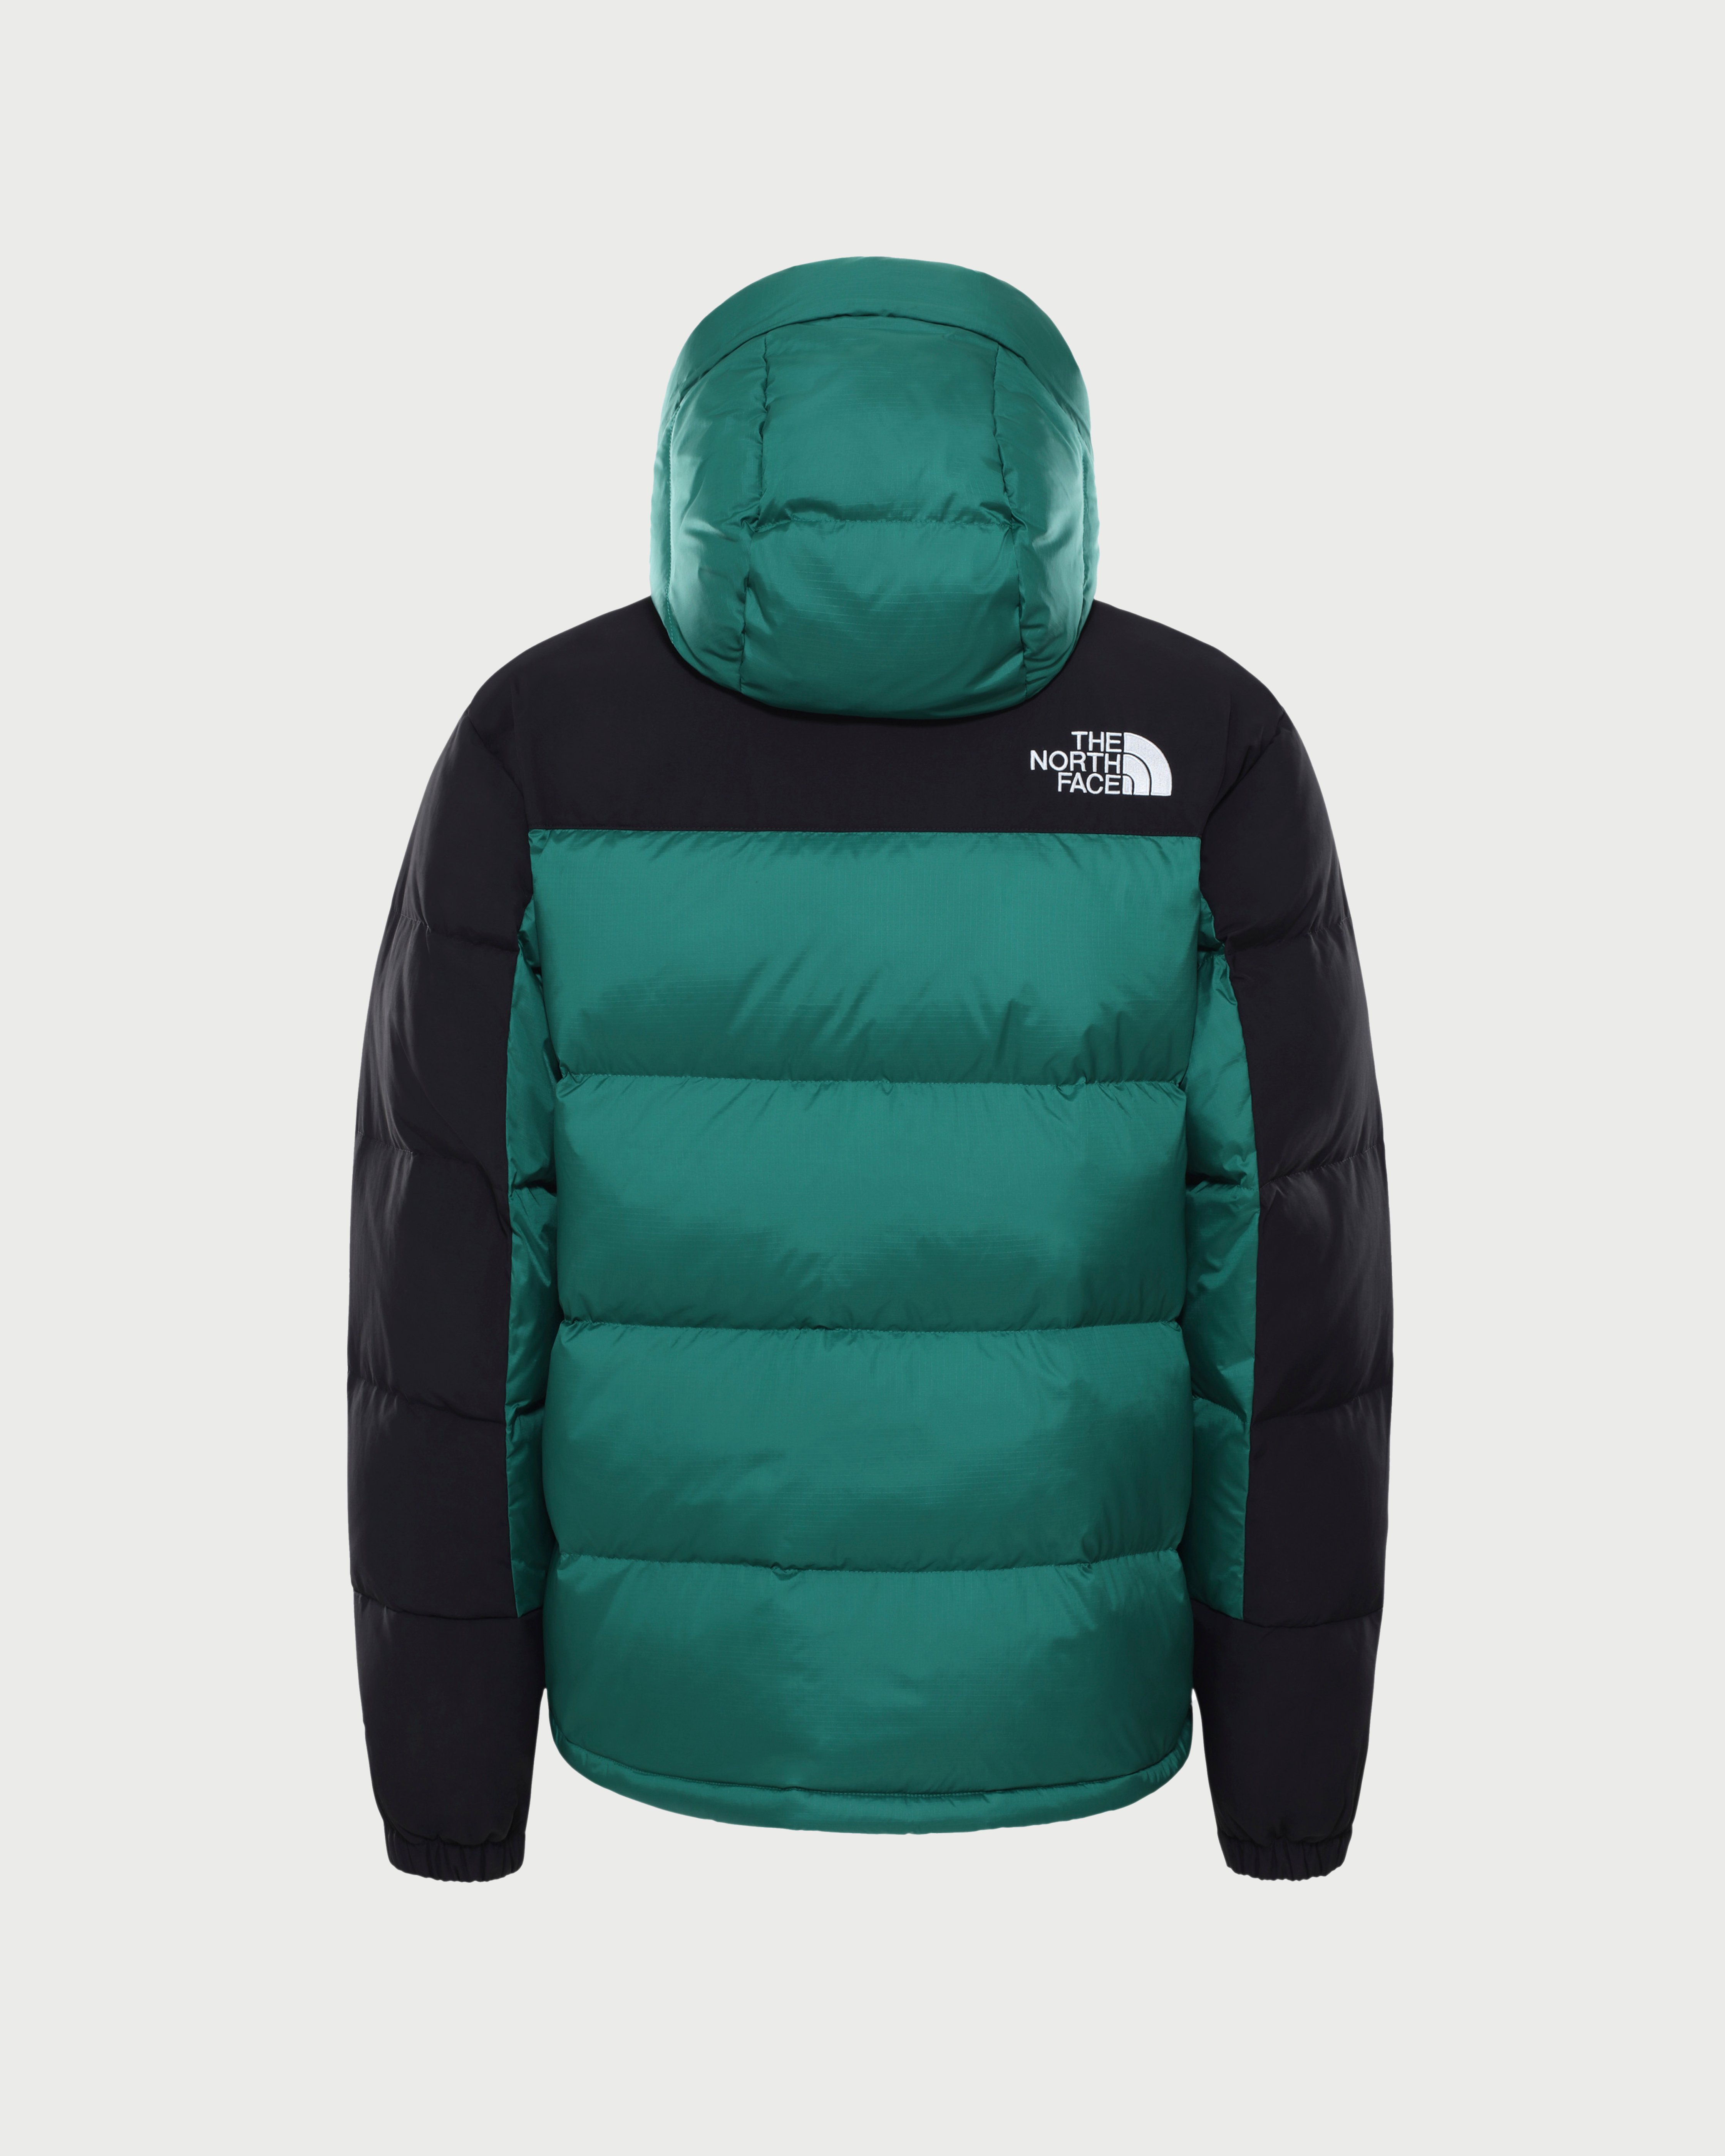 The North Face - Himalayan Down Jacket Peak Evergreen Unisex - Clothing - Green - Image 2